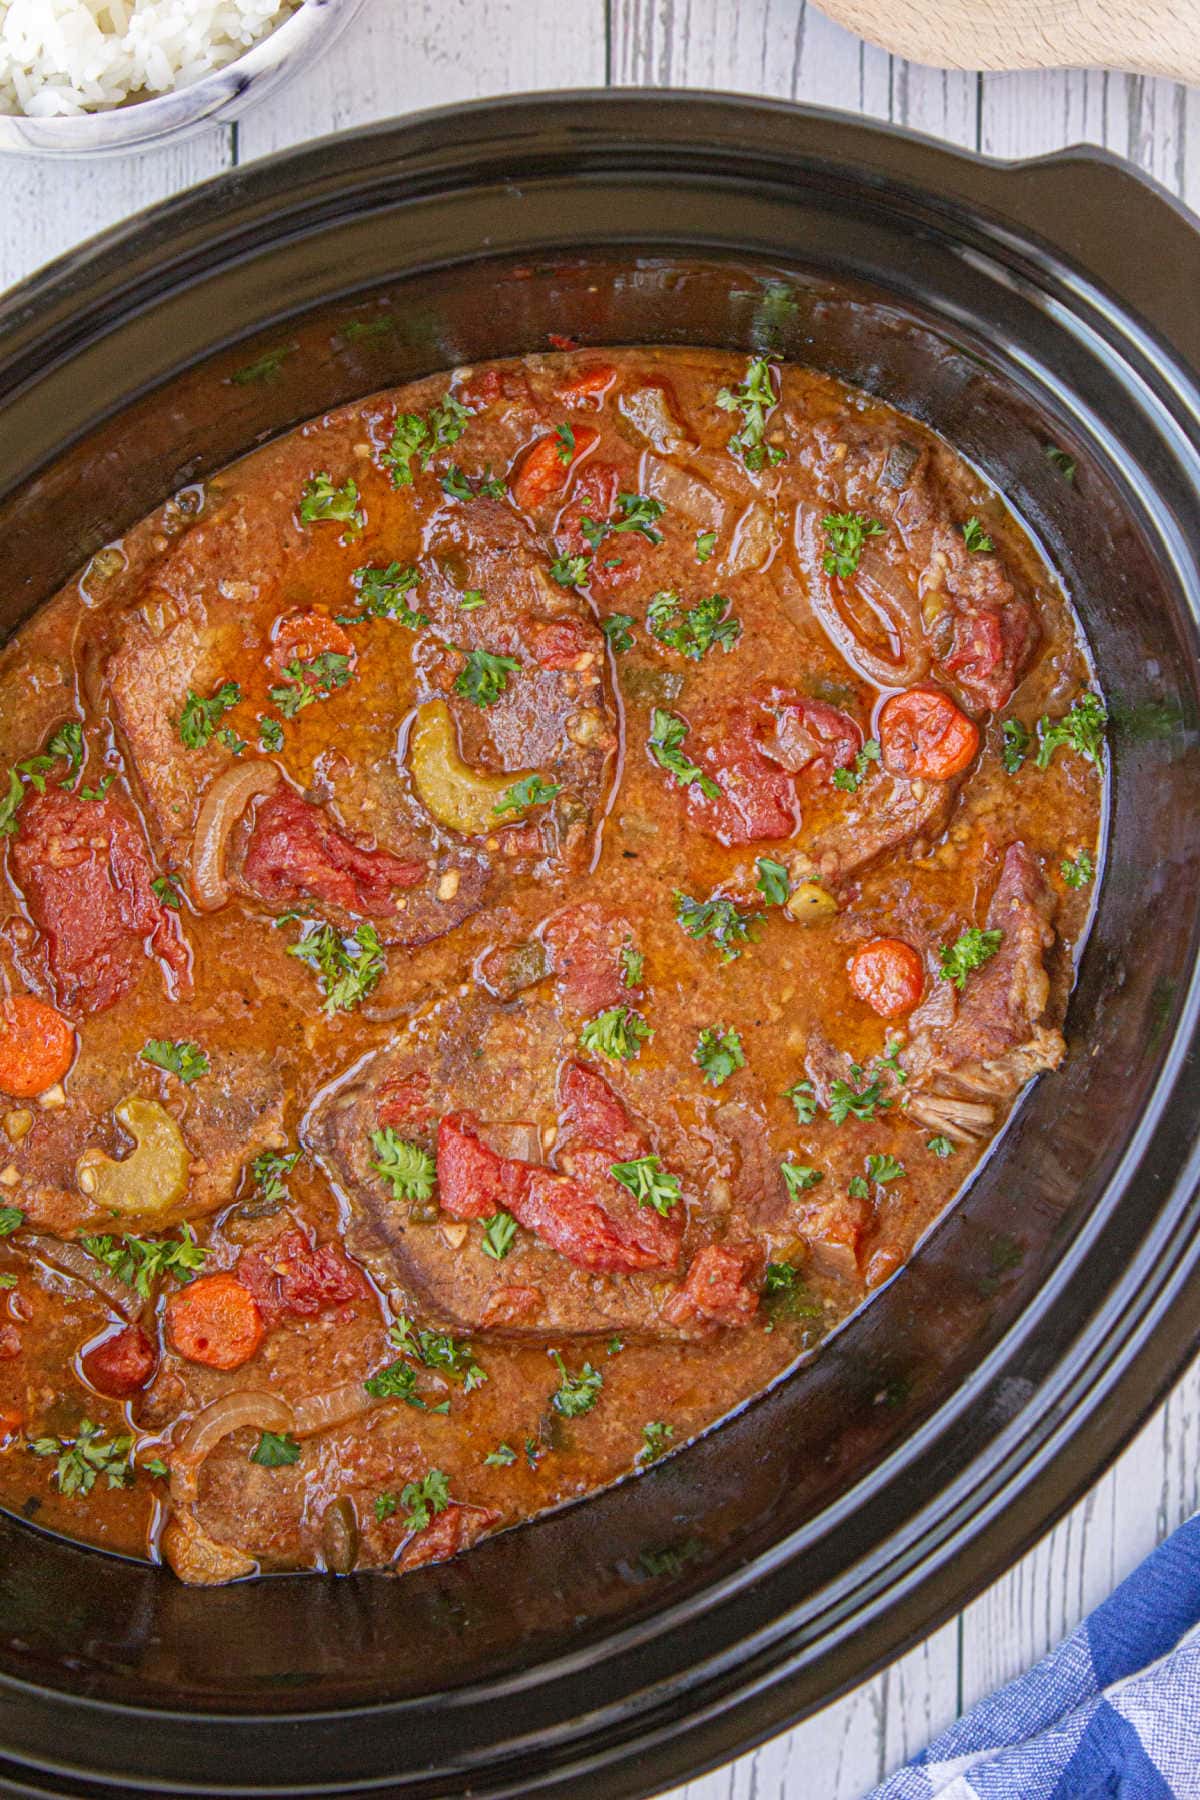 I Ditched My Fancy Slow Cooker In Favor Of My Mom's Old-School